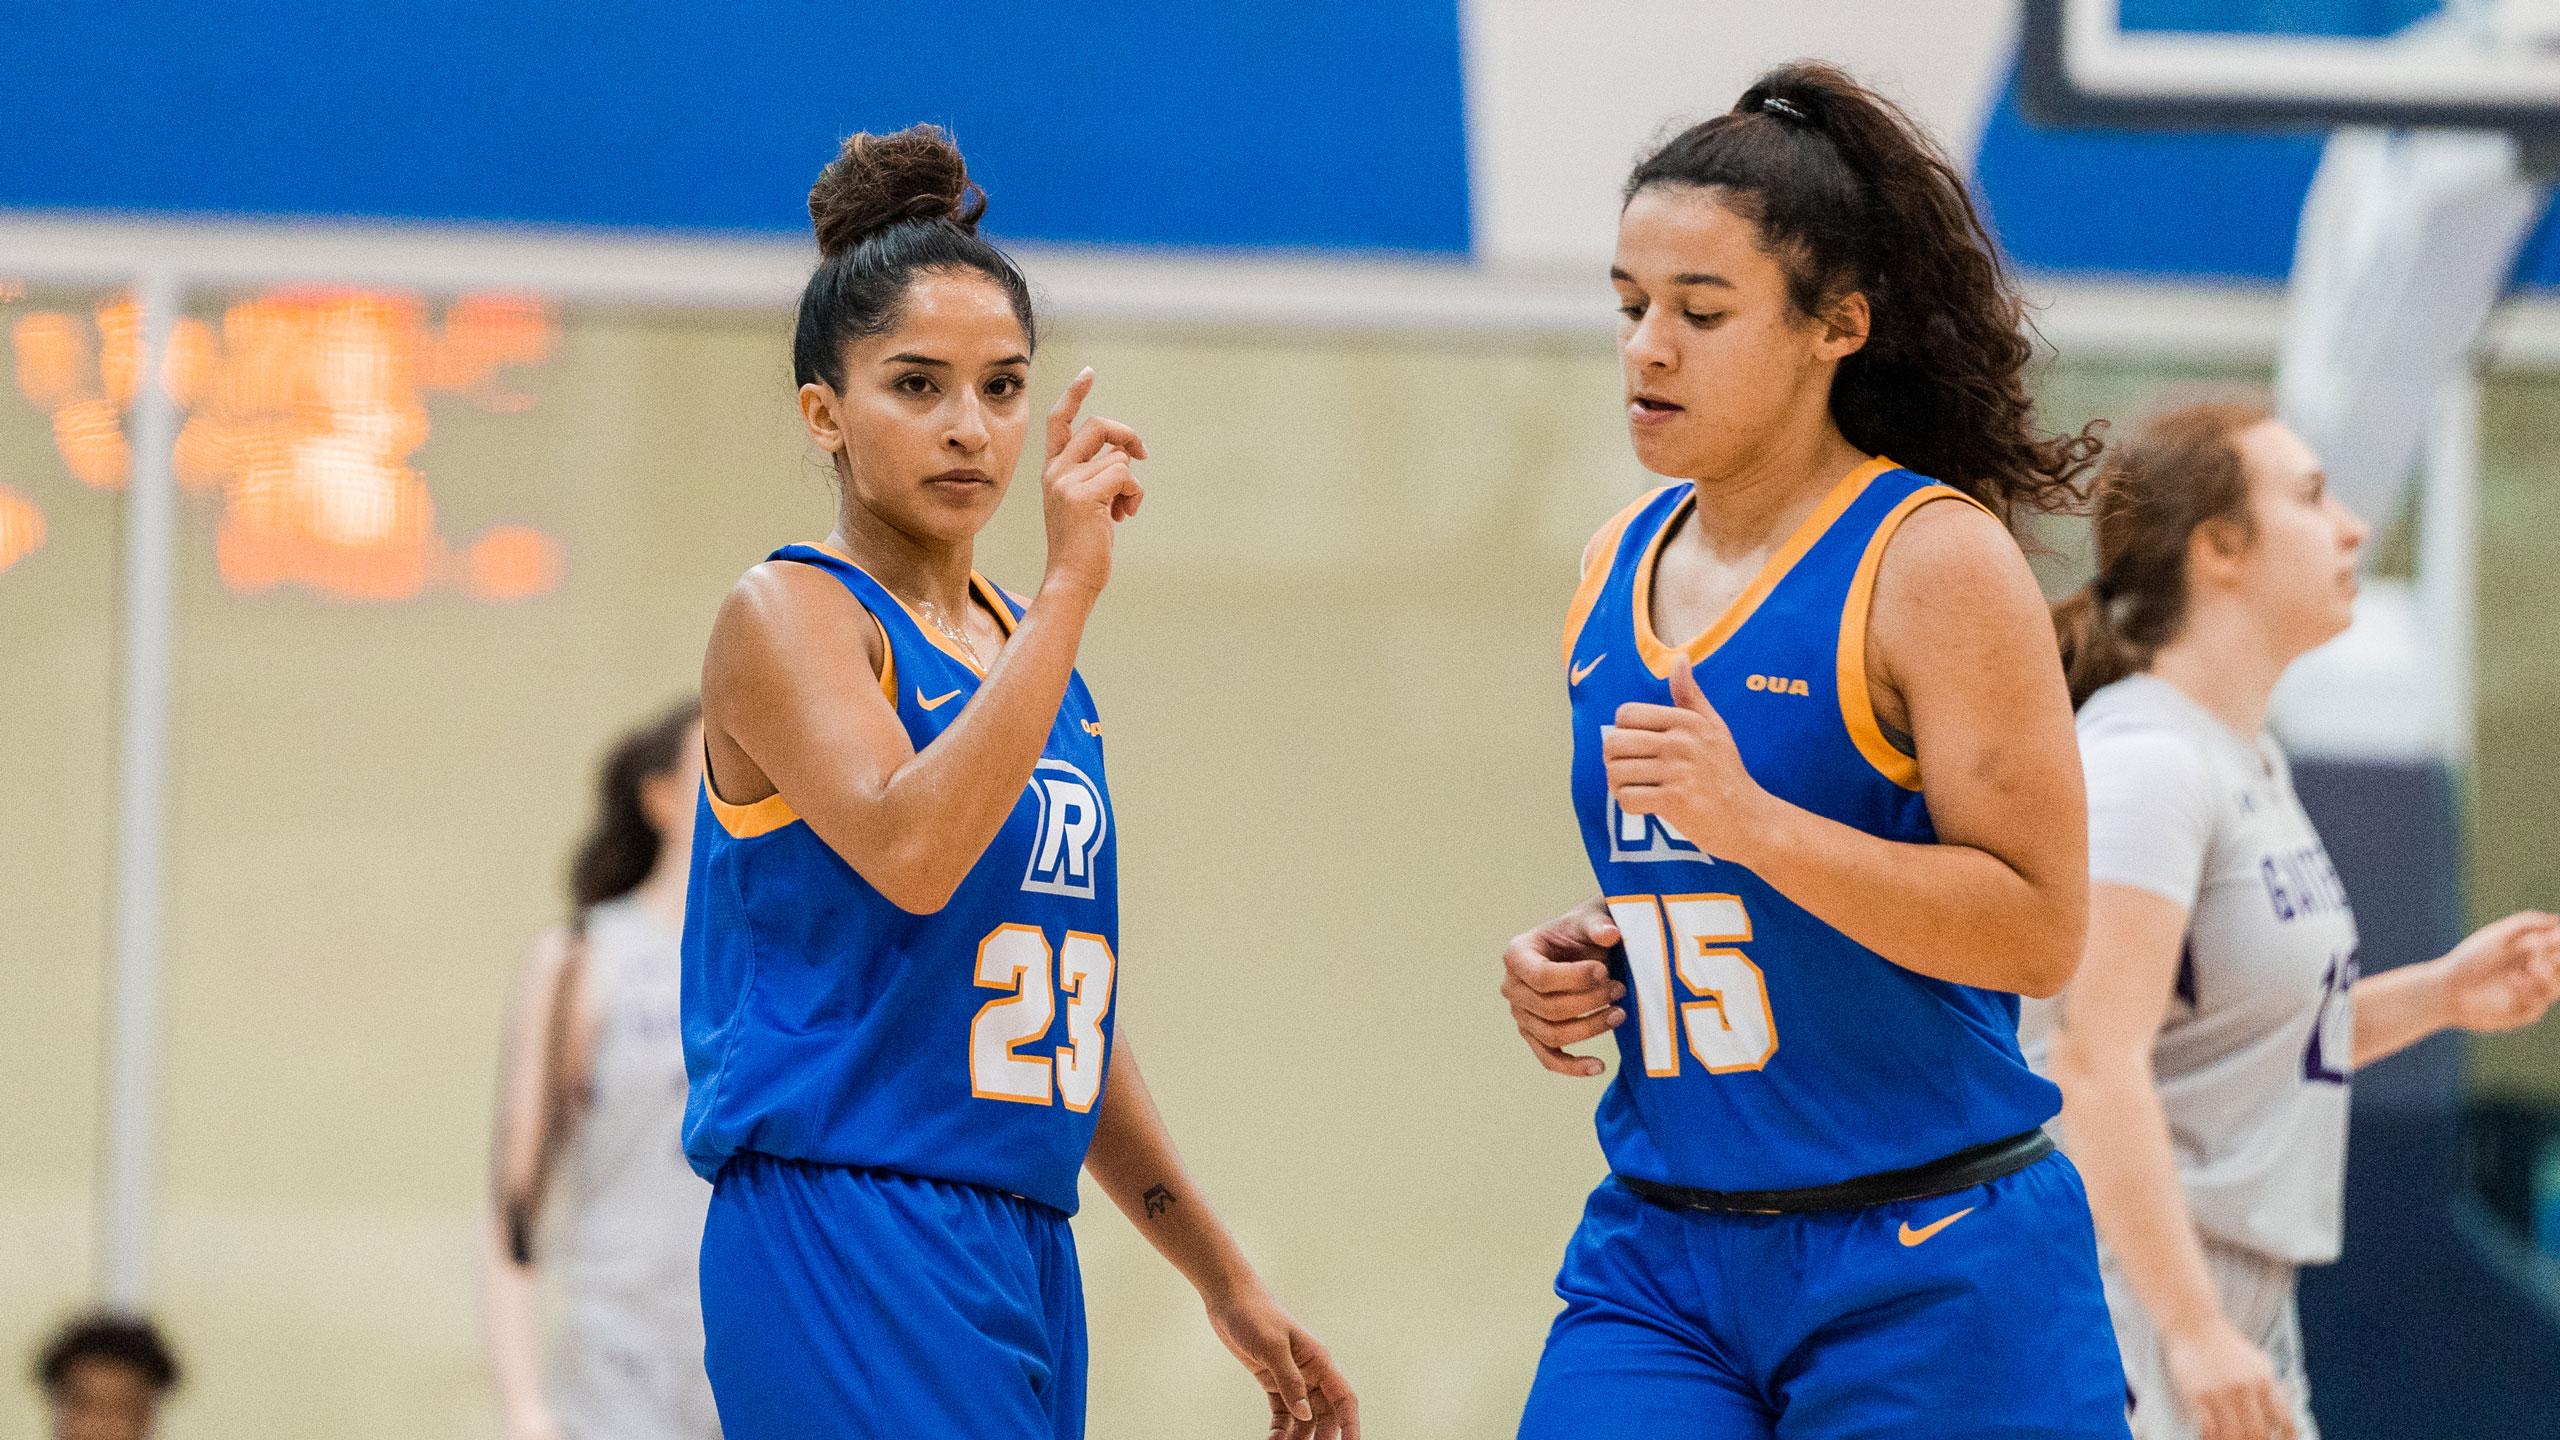 Two TMU women's basketball players in blue jerseys face the camera